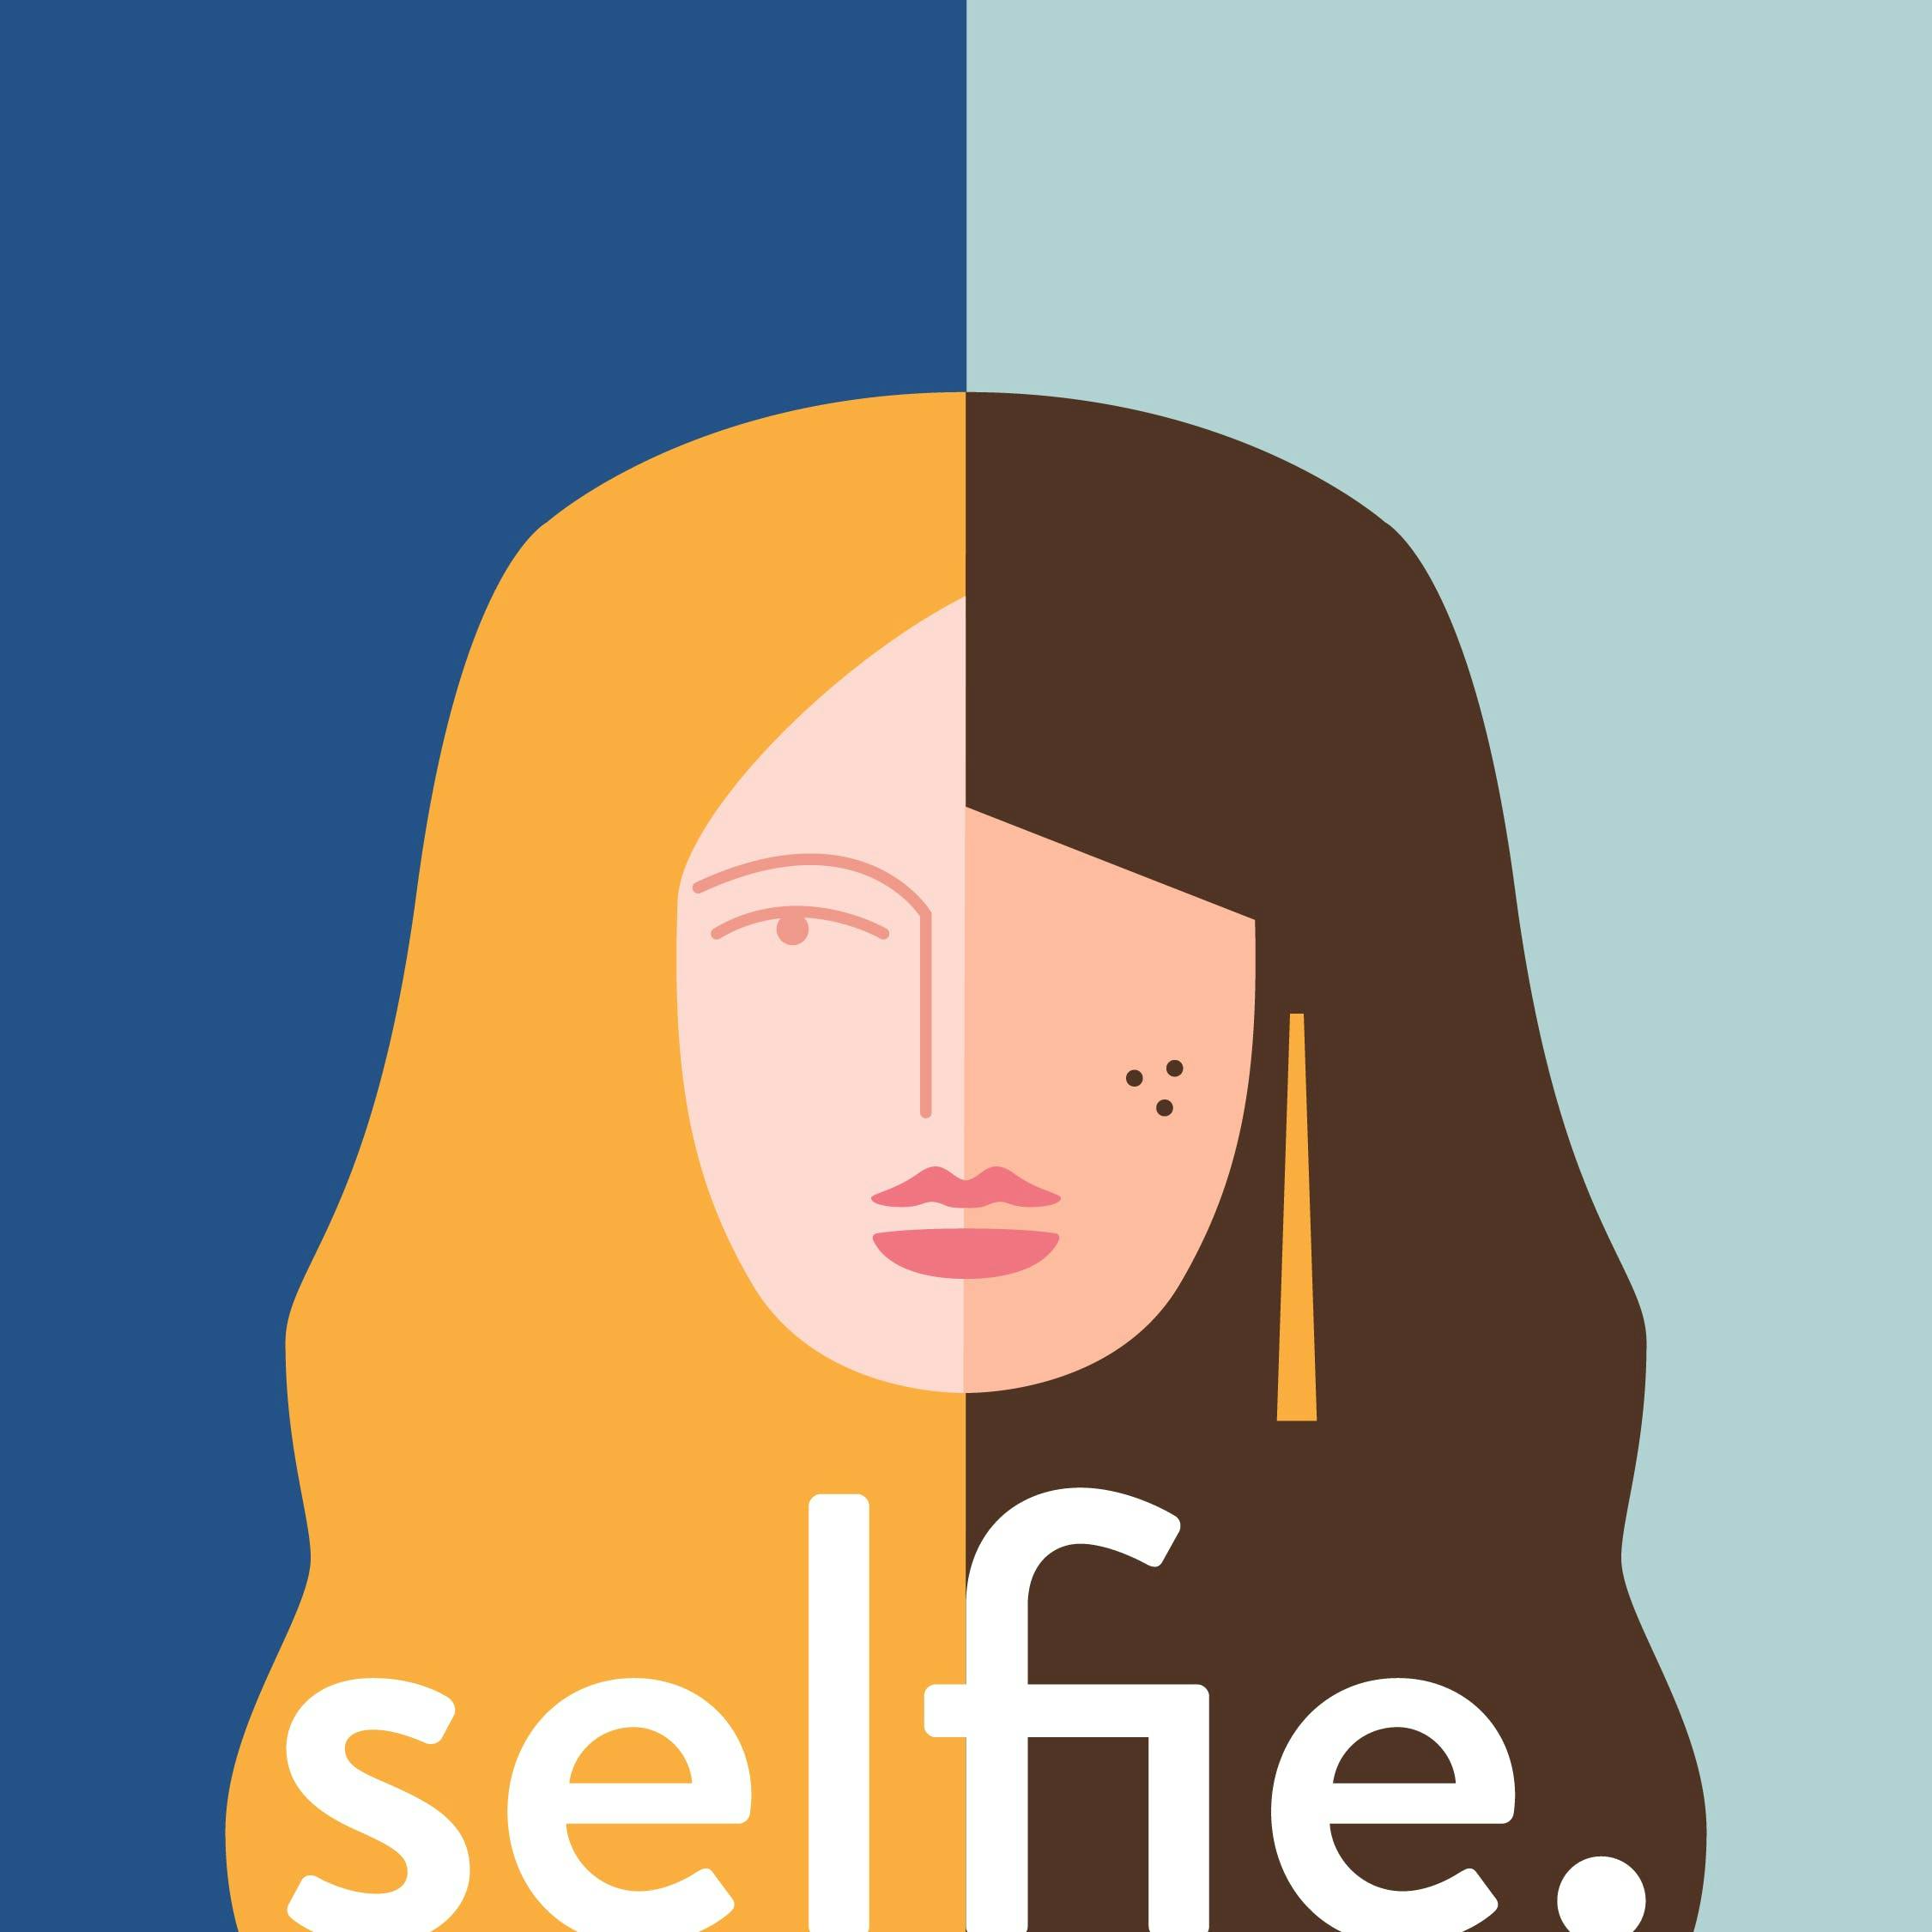 Differentiation as Self-Care, Best Botox Practice, and Healing After Sexual Assault | Selfie Podcast Episode 114